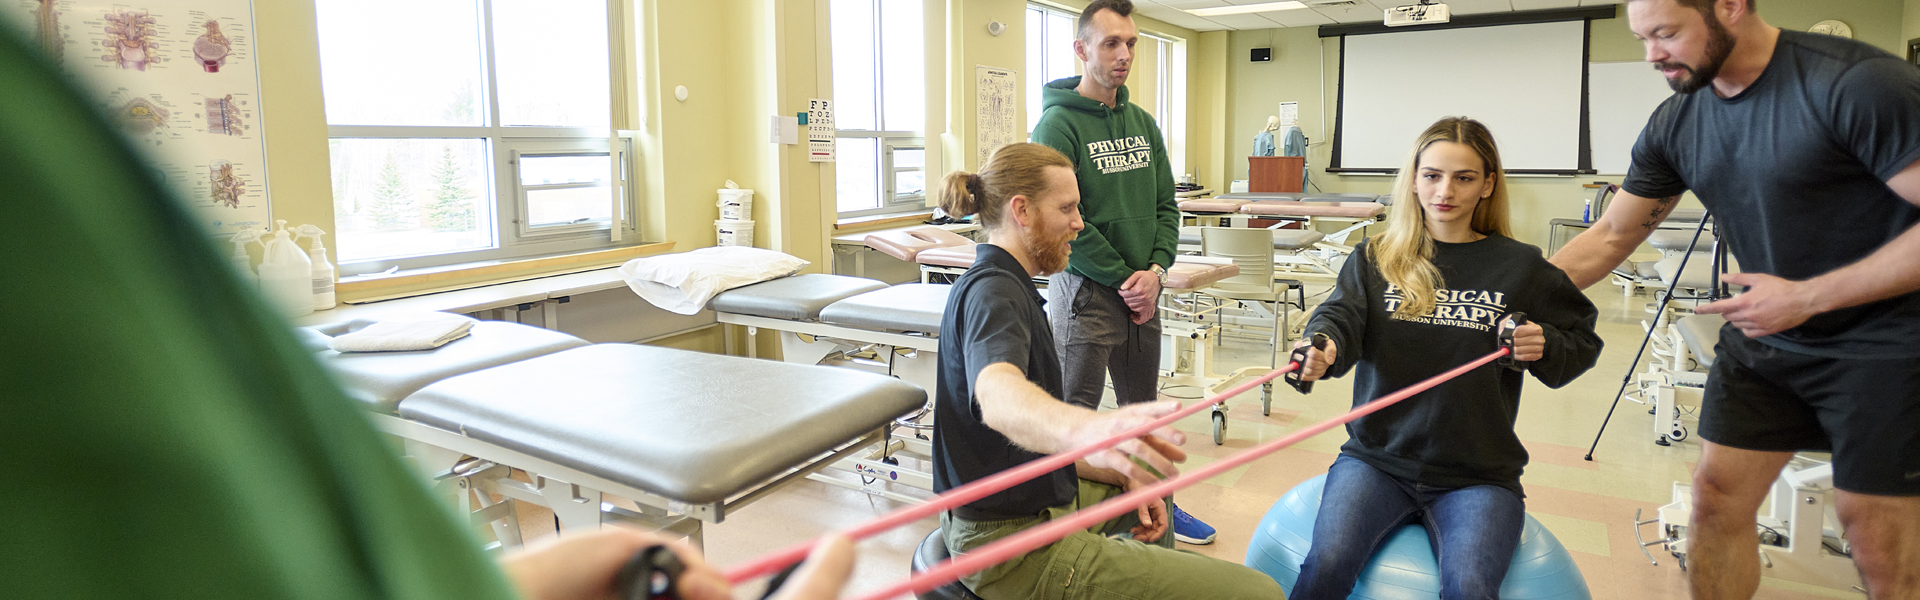 Students and faculty work in a Physical Therapy Simulation Lab